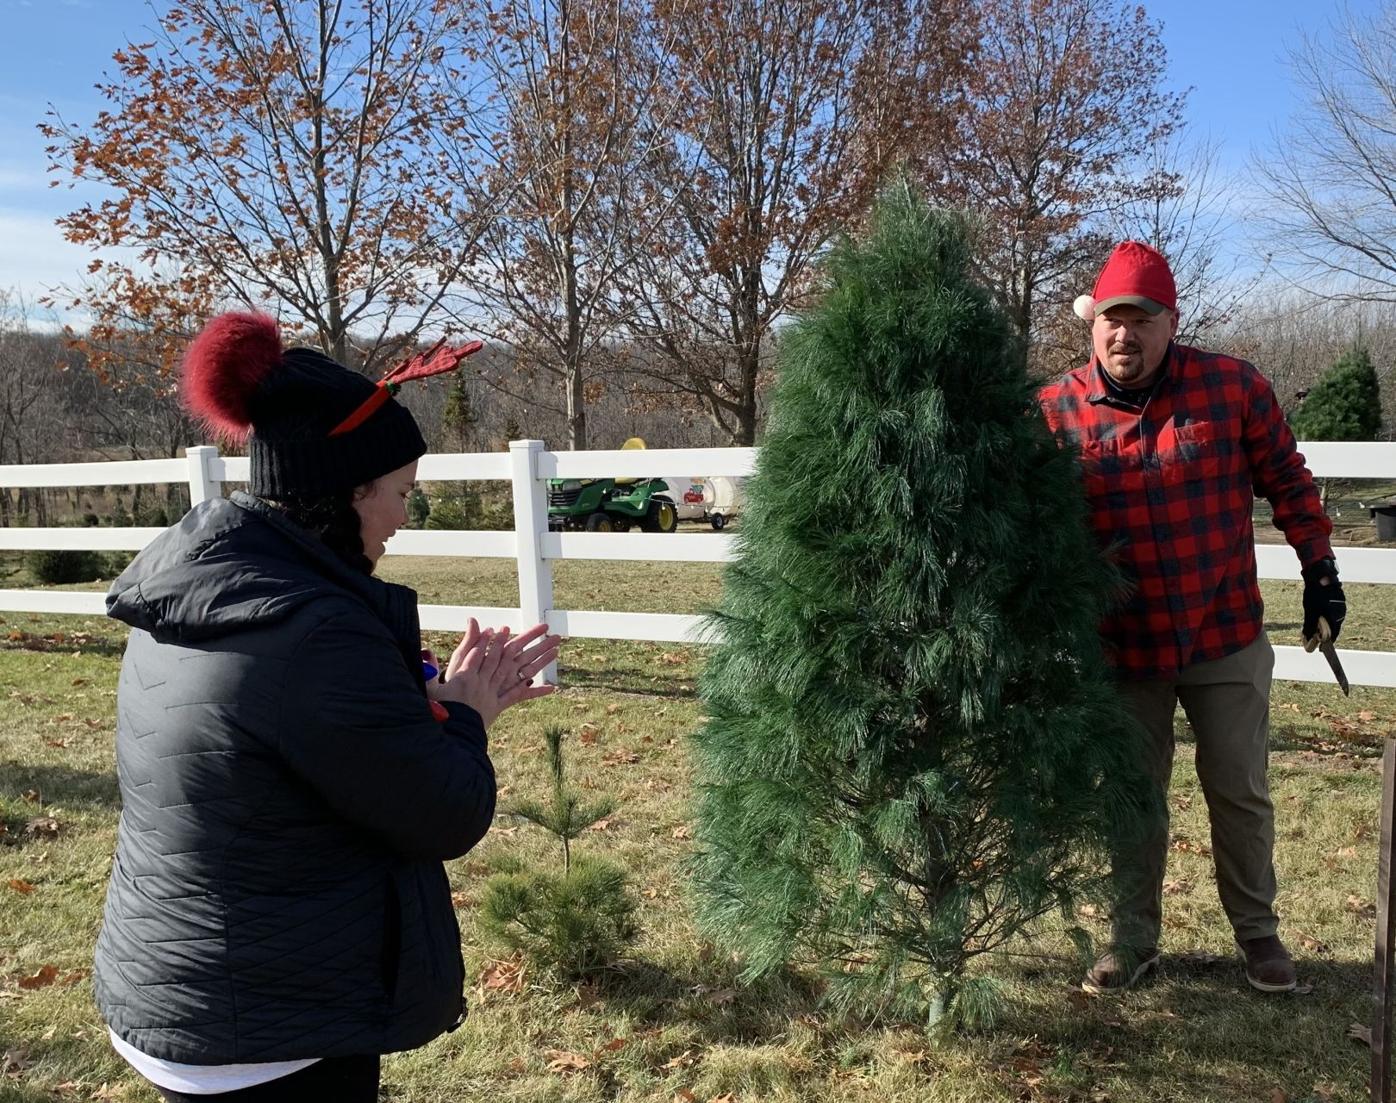 'Favorite time of the year' as families select Christmas trees at farm